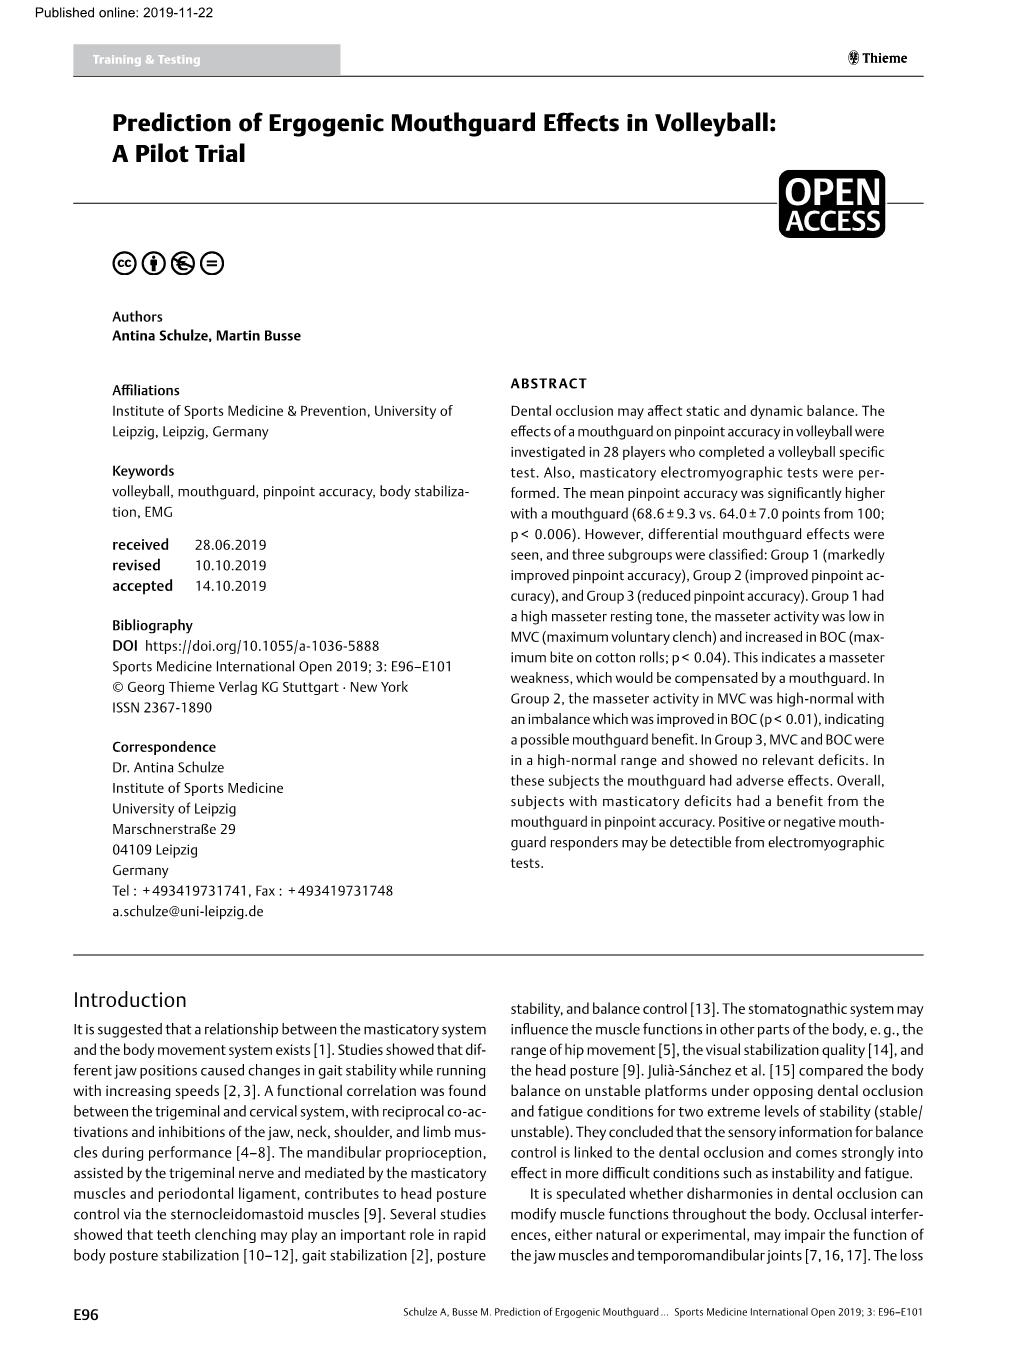 Prediction of Ergogenic Mouthguard Effects in Volleyball: a Pilot Trial